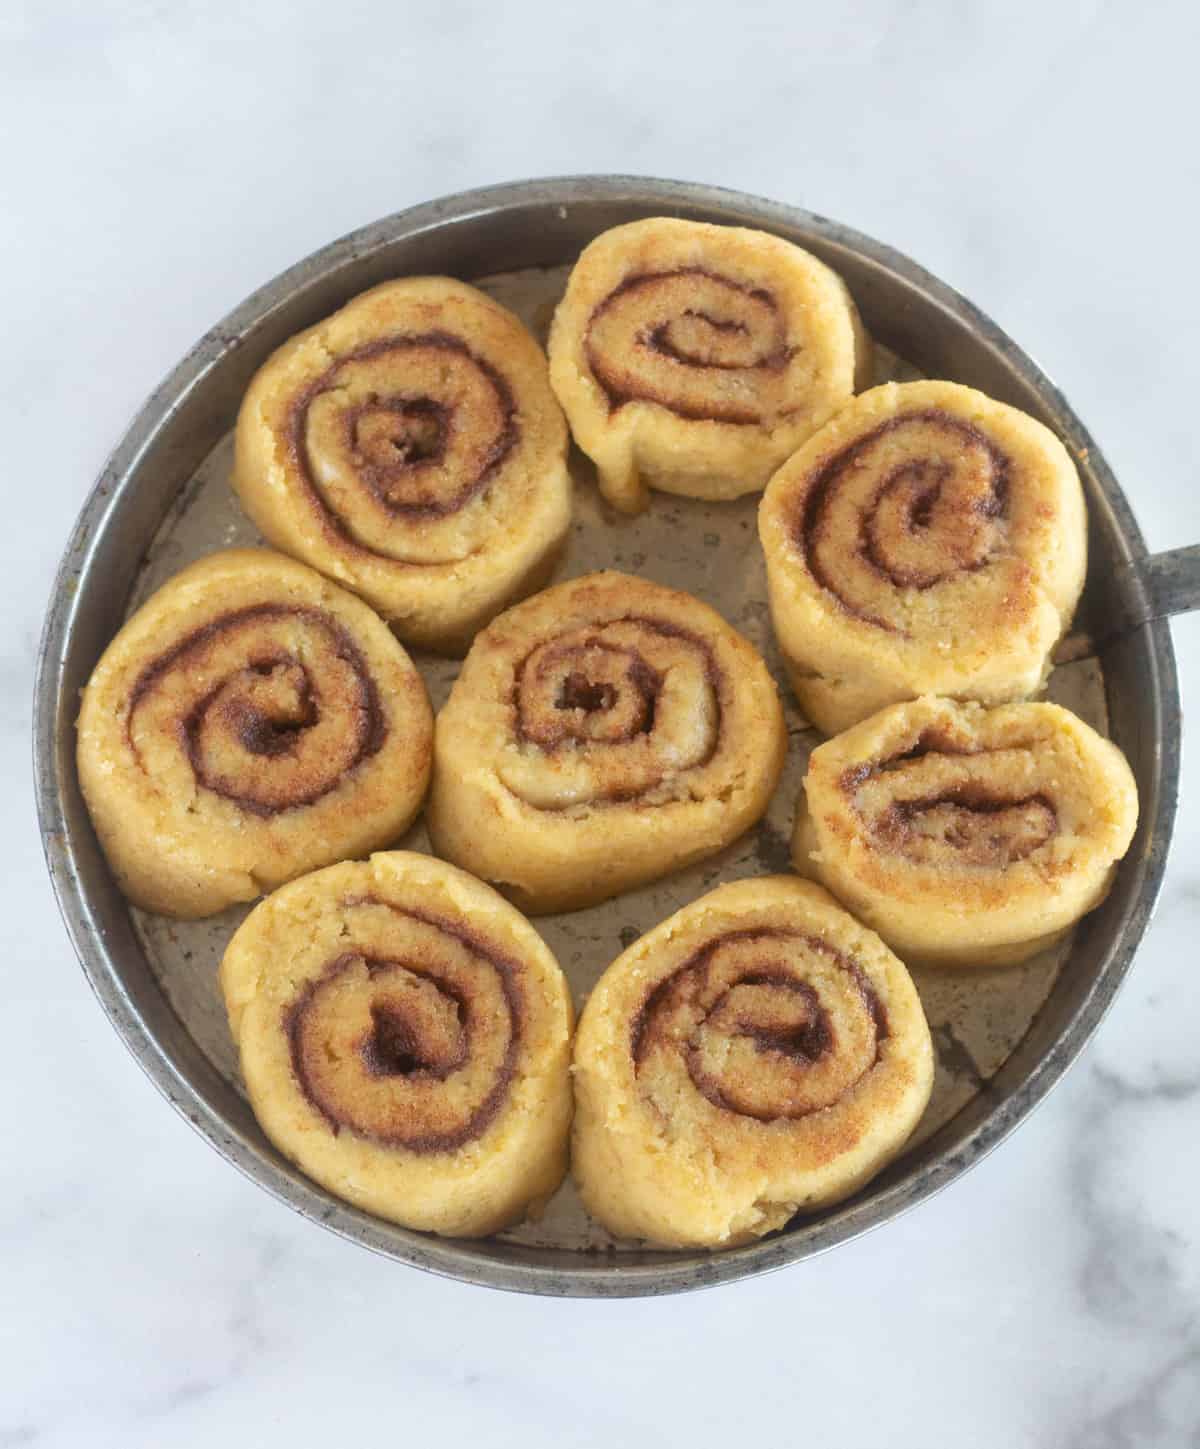 unbaked cinnamon rolls after rising 1 hour